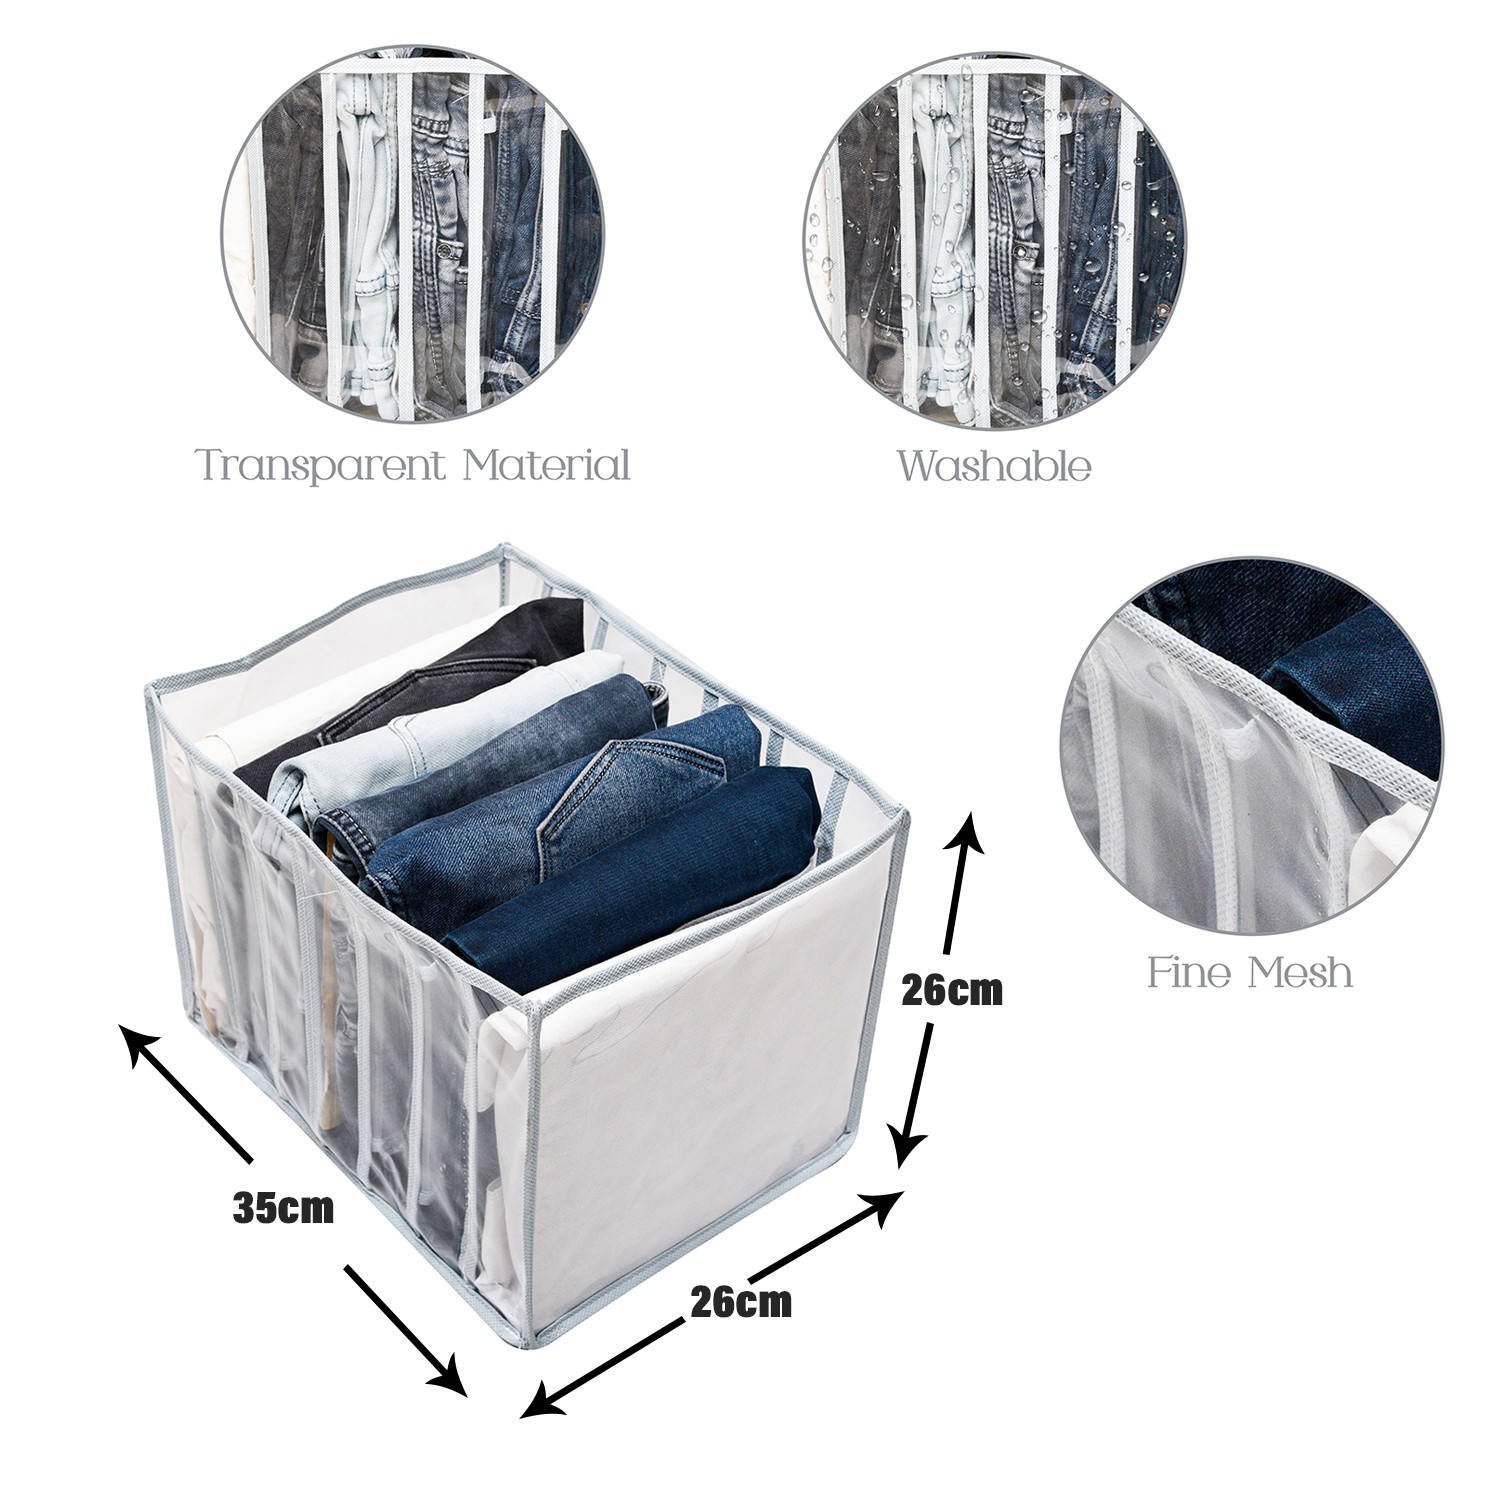 Kuber Industries Wardrobe Cloth Organizer | PVC .40mm Drawer Organizer | 7 Grids Foldable | Clear Transparent for T-shirts | Trousers | Socks | Gray